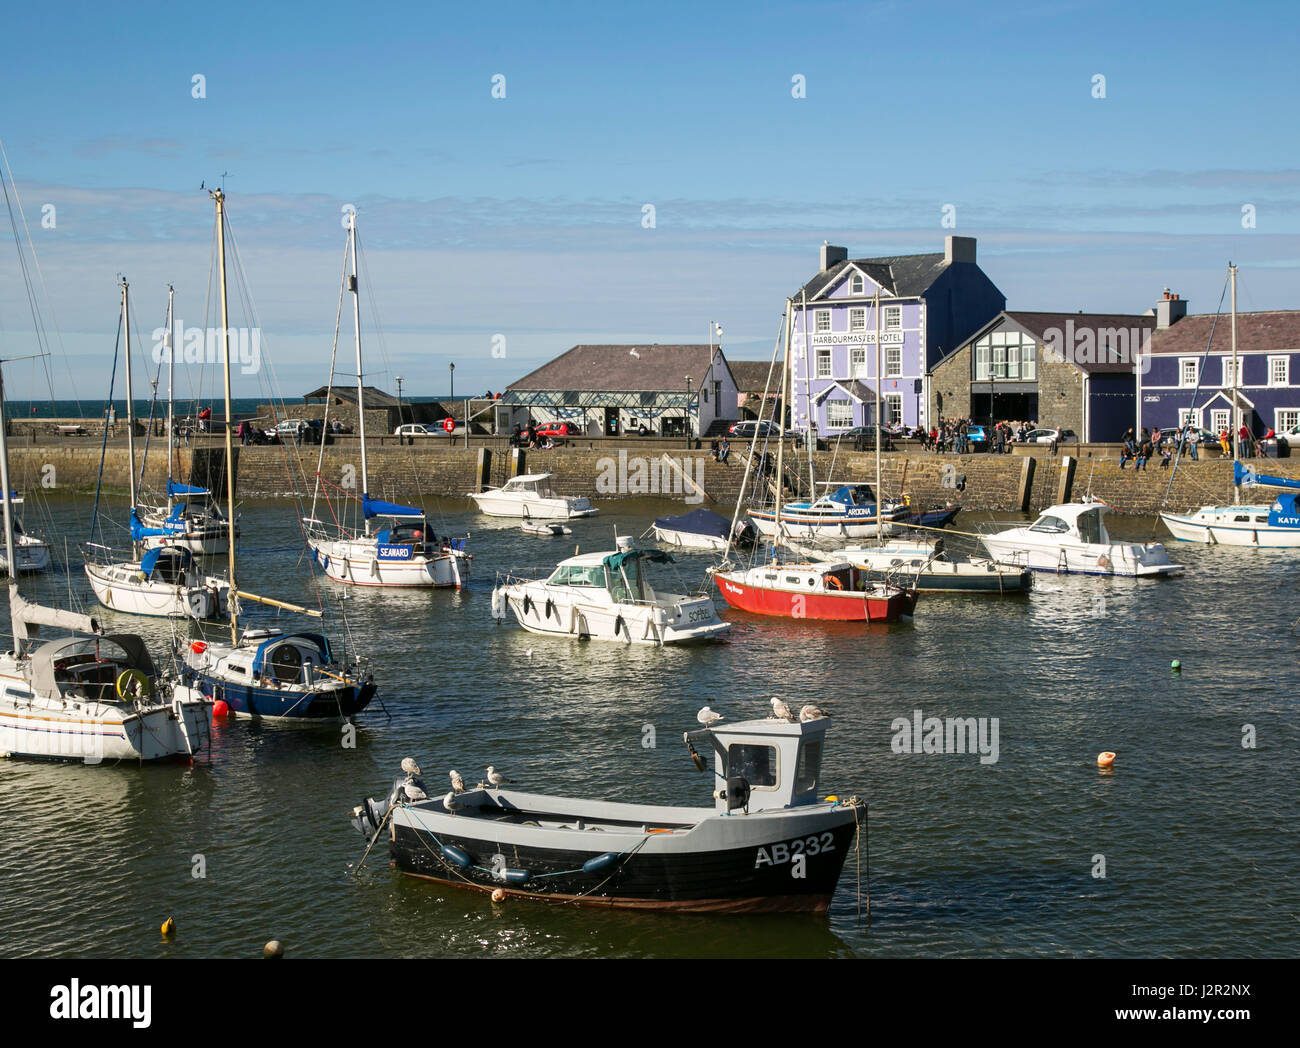 The charming Georgian port town of Aberaeron on the Cardigan Bay Coast, Ceredigion, West Wales with sailing boats and fishing boats in the harbour. Stock Photo